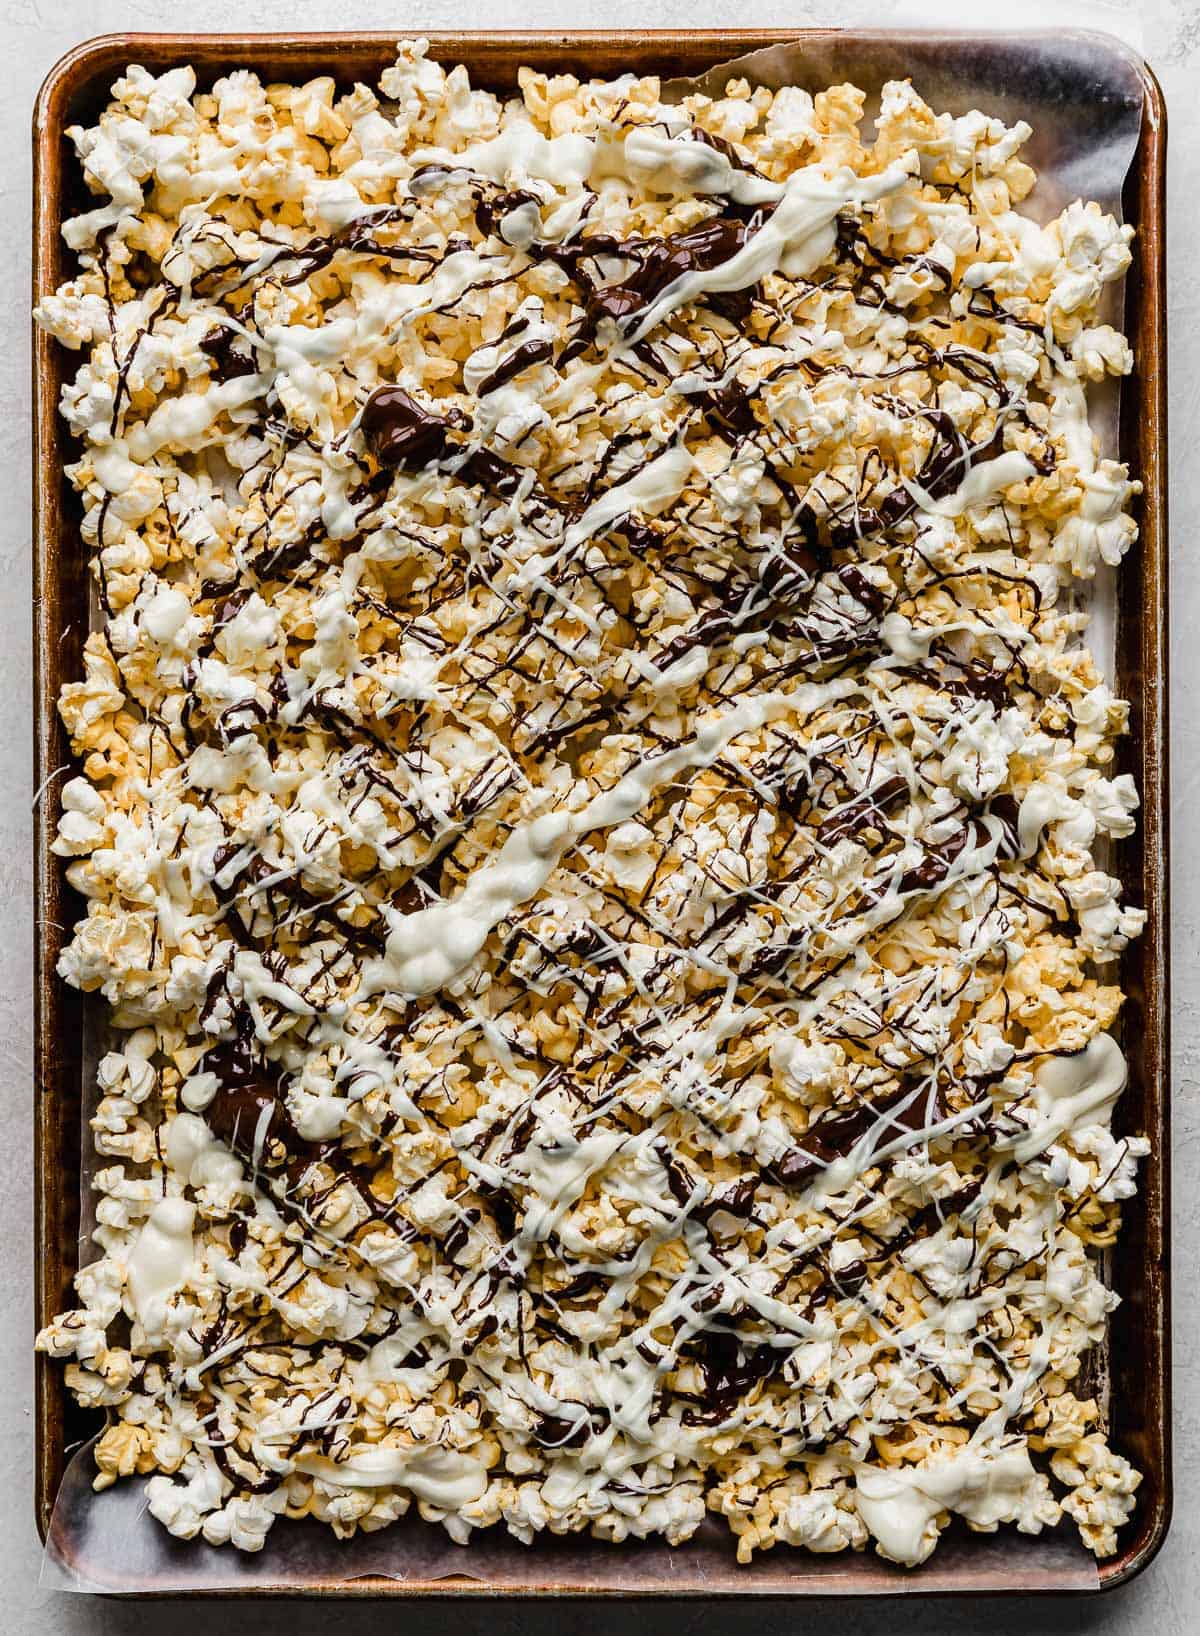 White chocolate and dark chocolate drizzled overtop of popped popcorn.